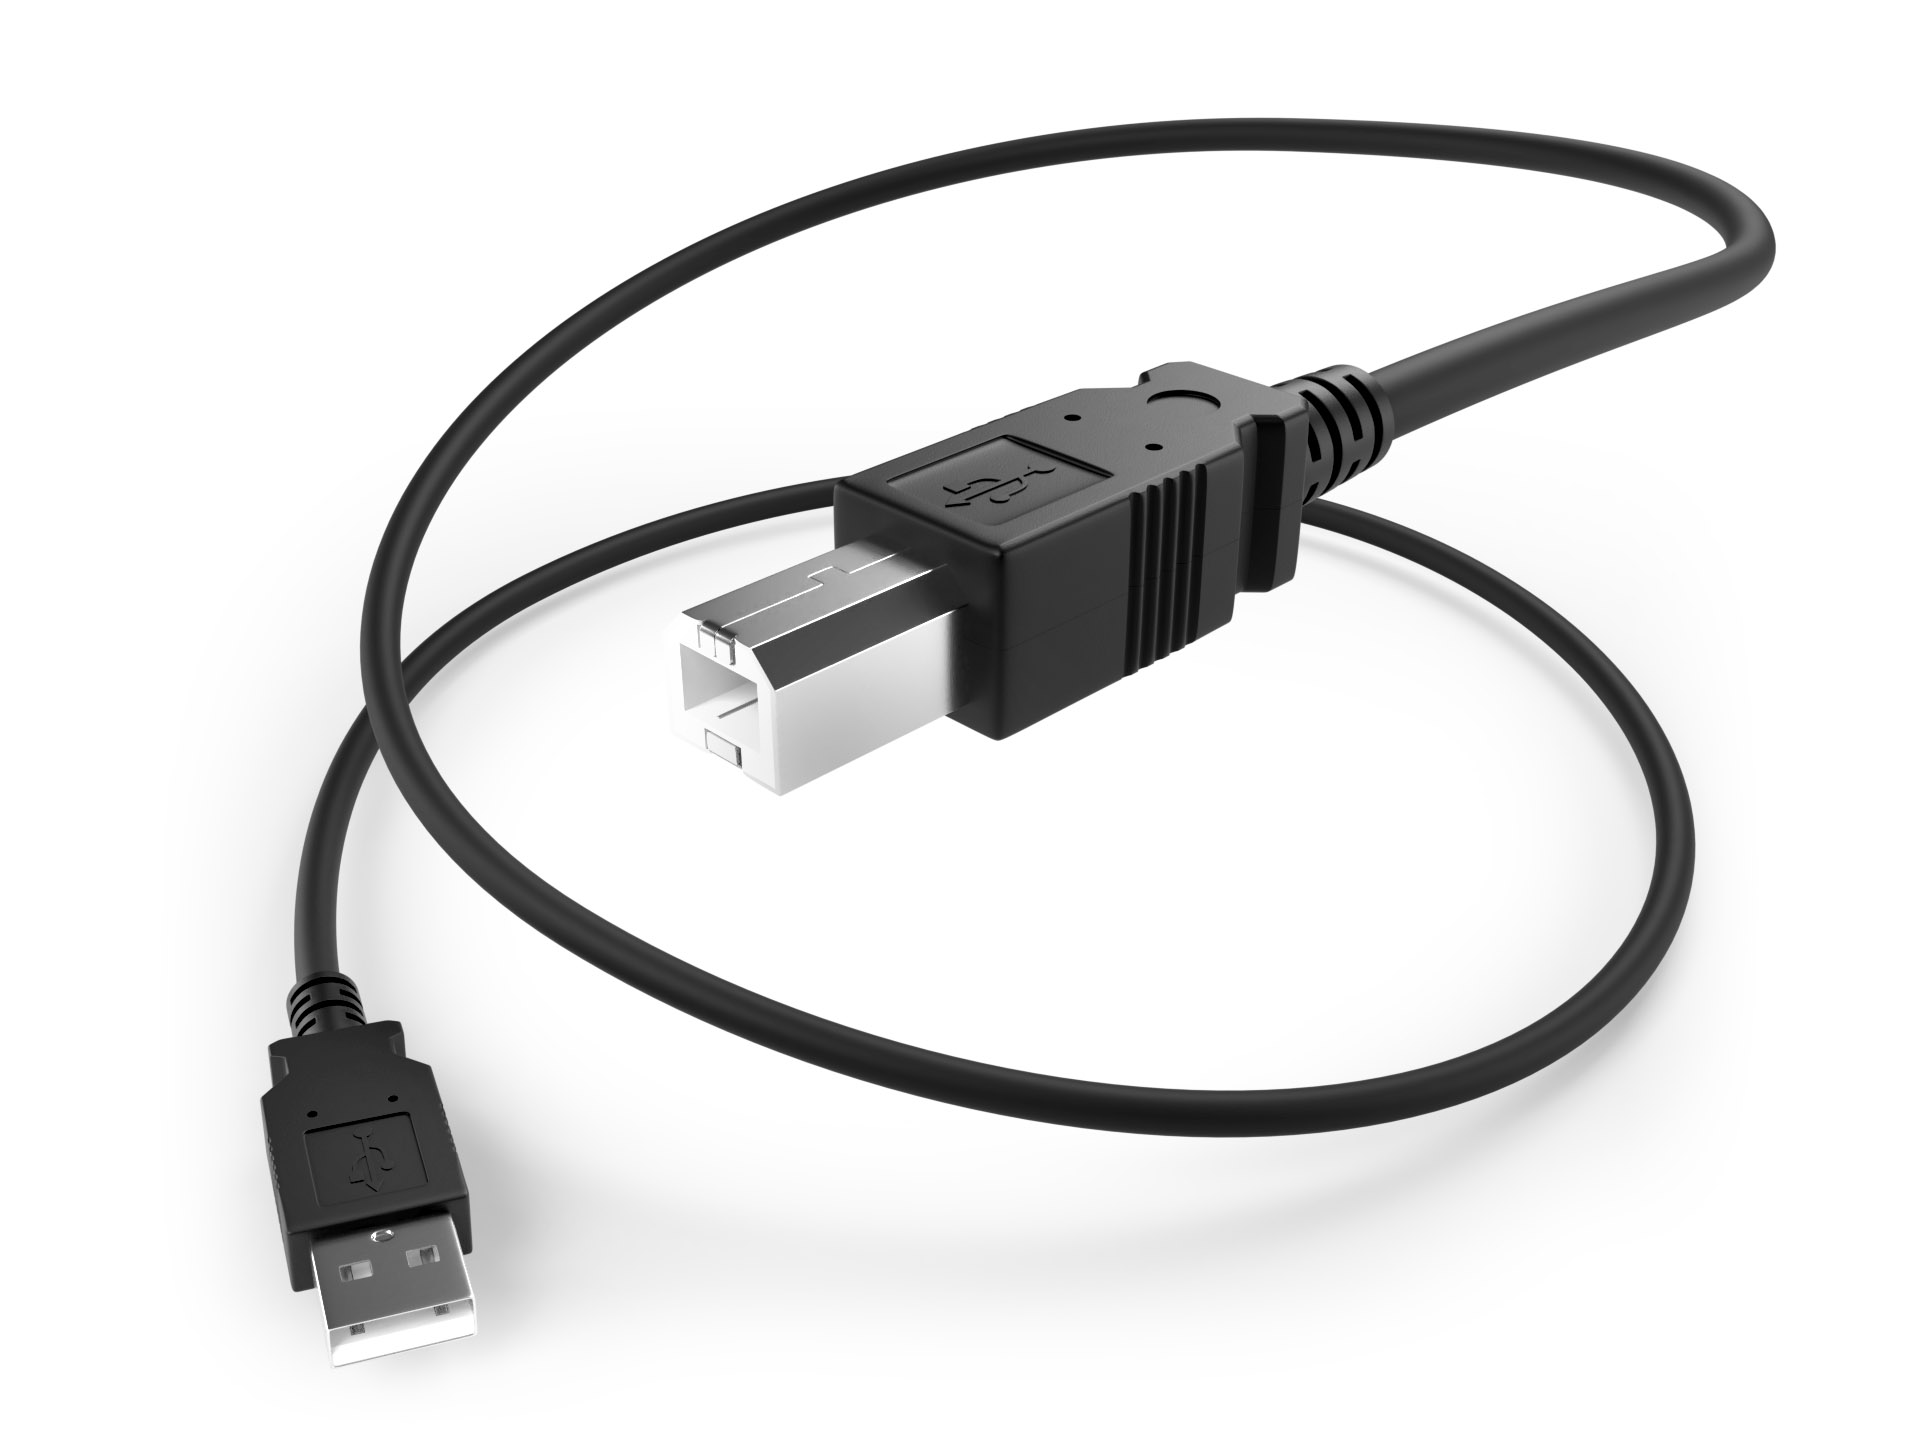 image of a USB A to B cable